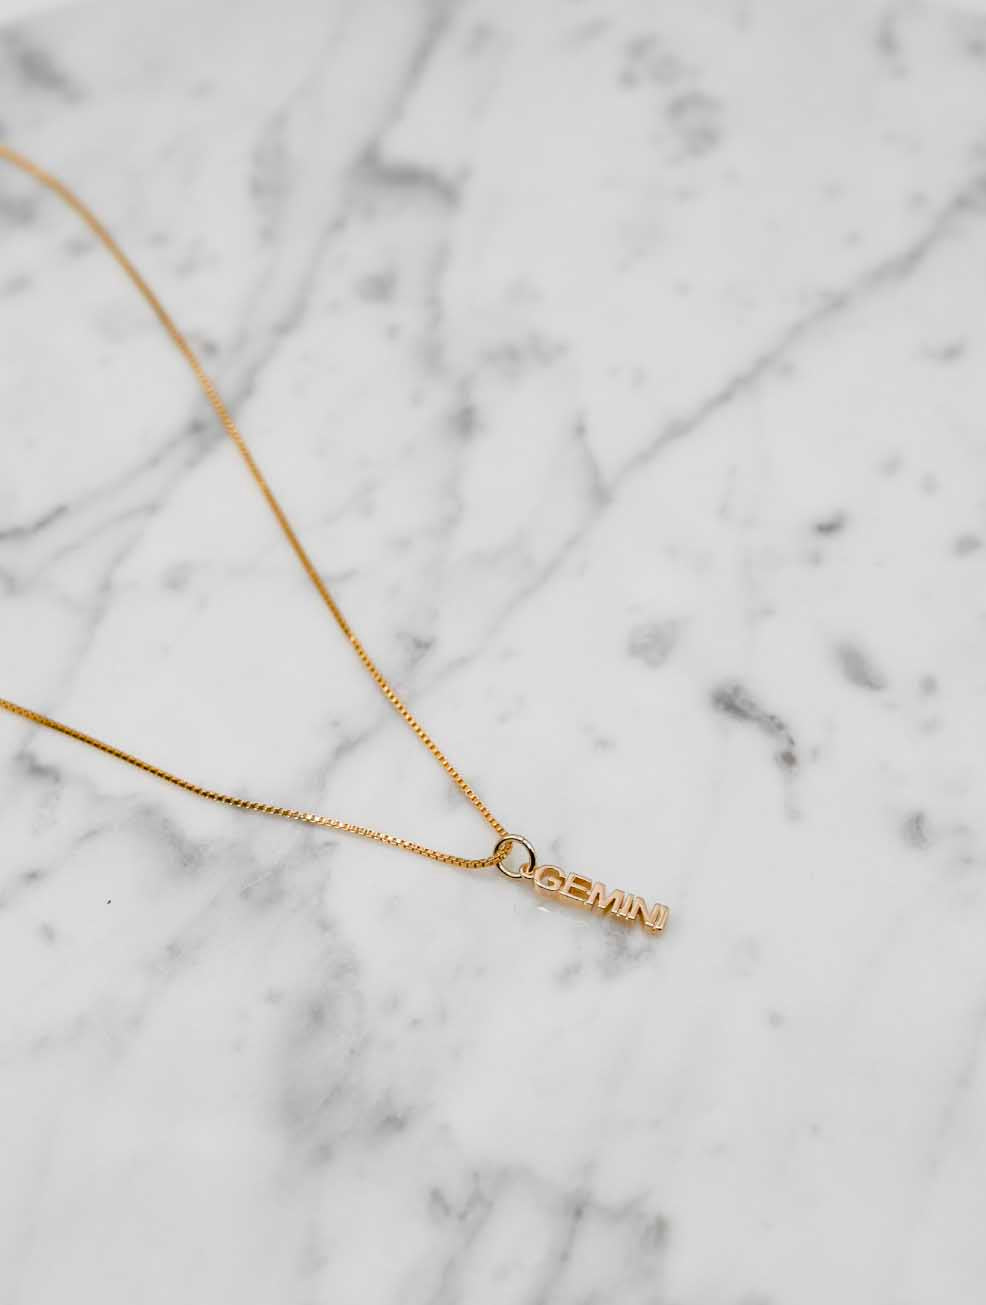 Zodiac Necklaces in Gold